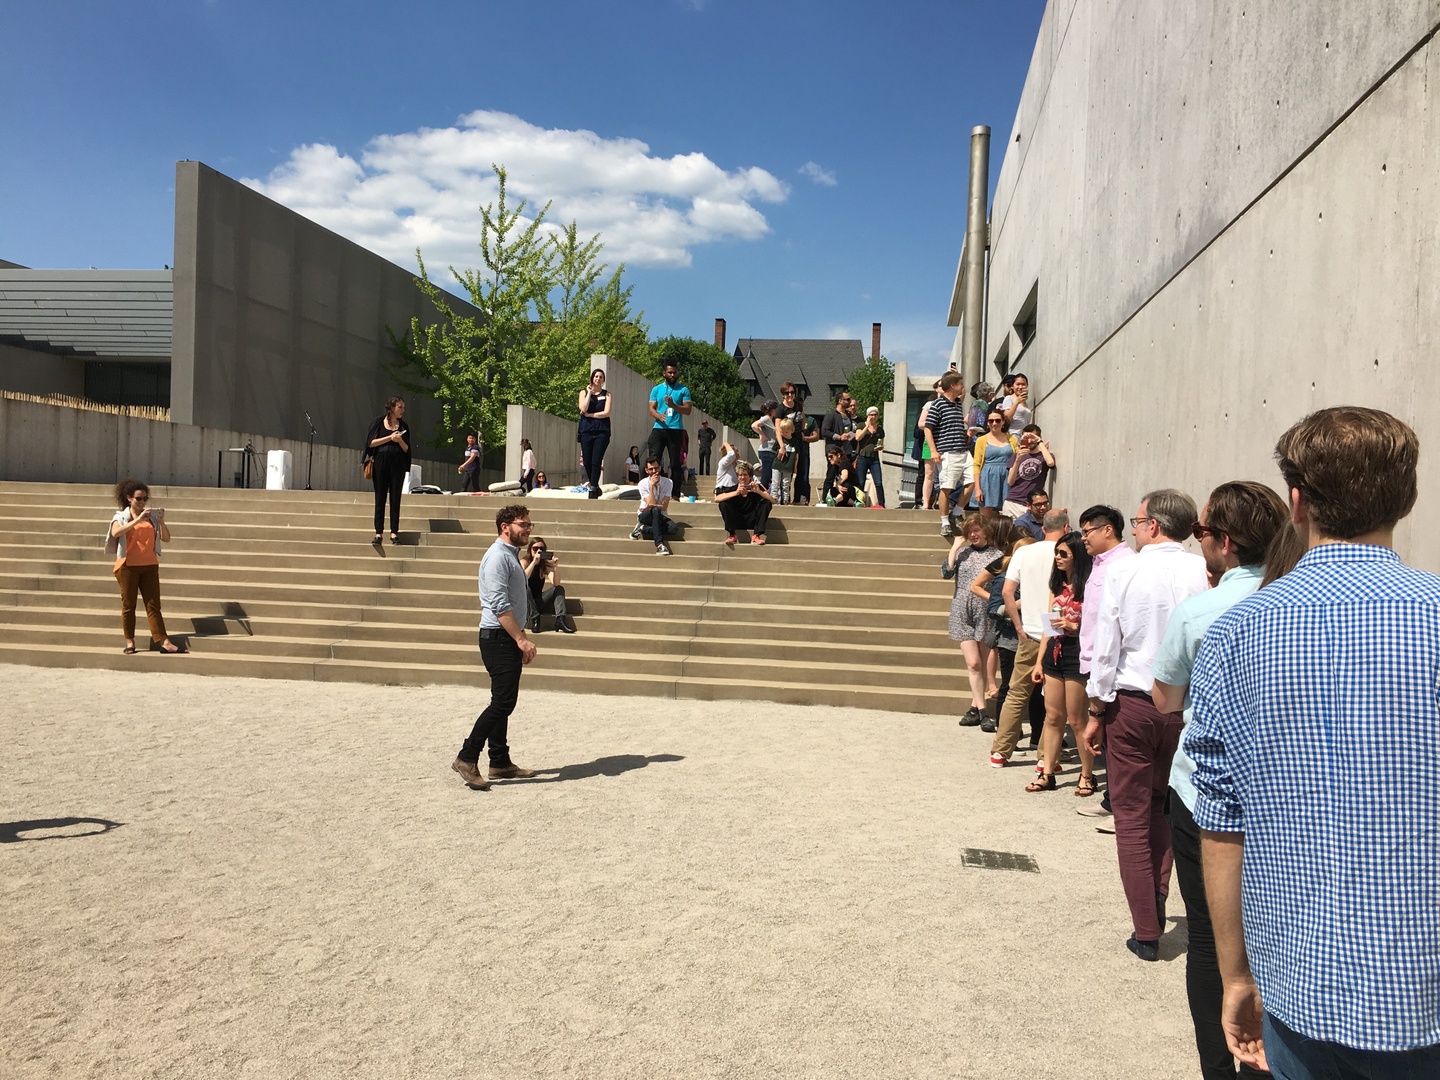 Group of people in a graveled courtyard lined up along a concrete wall.